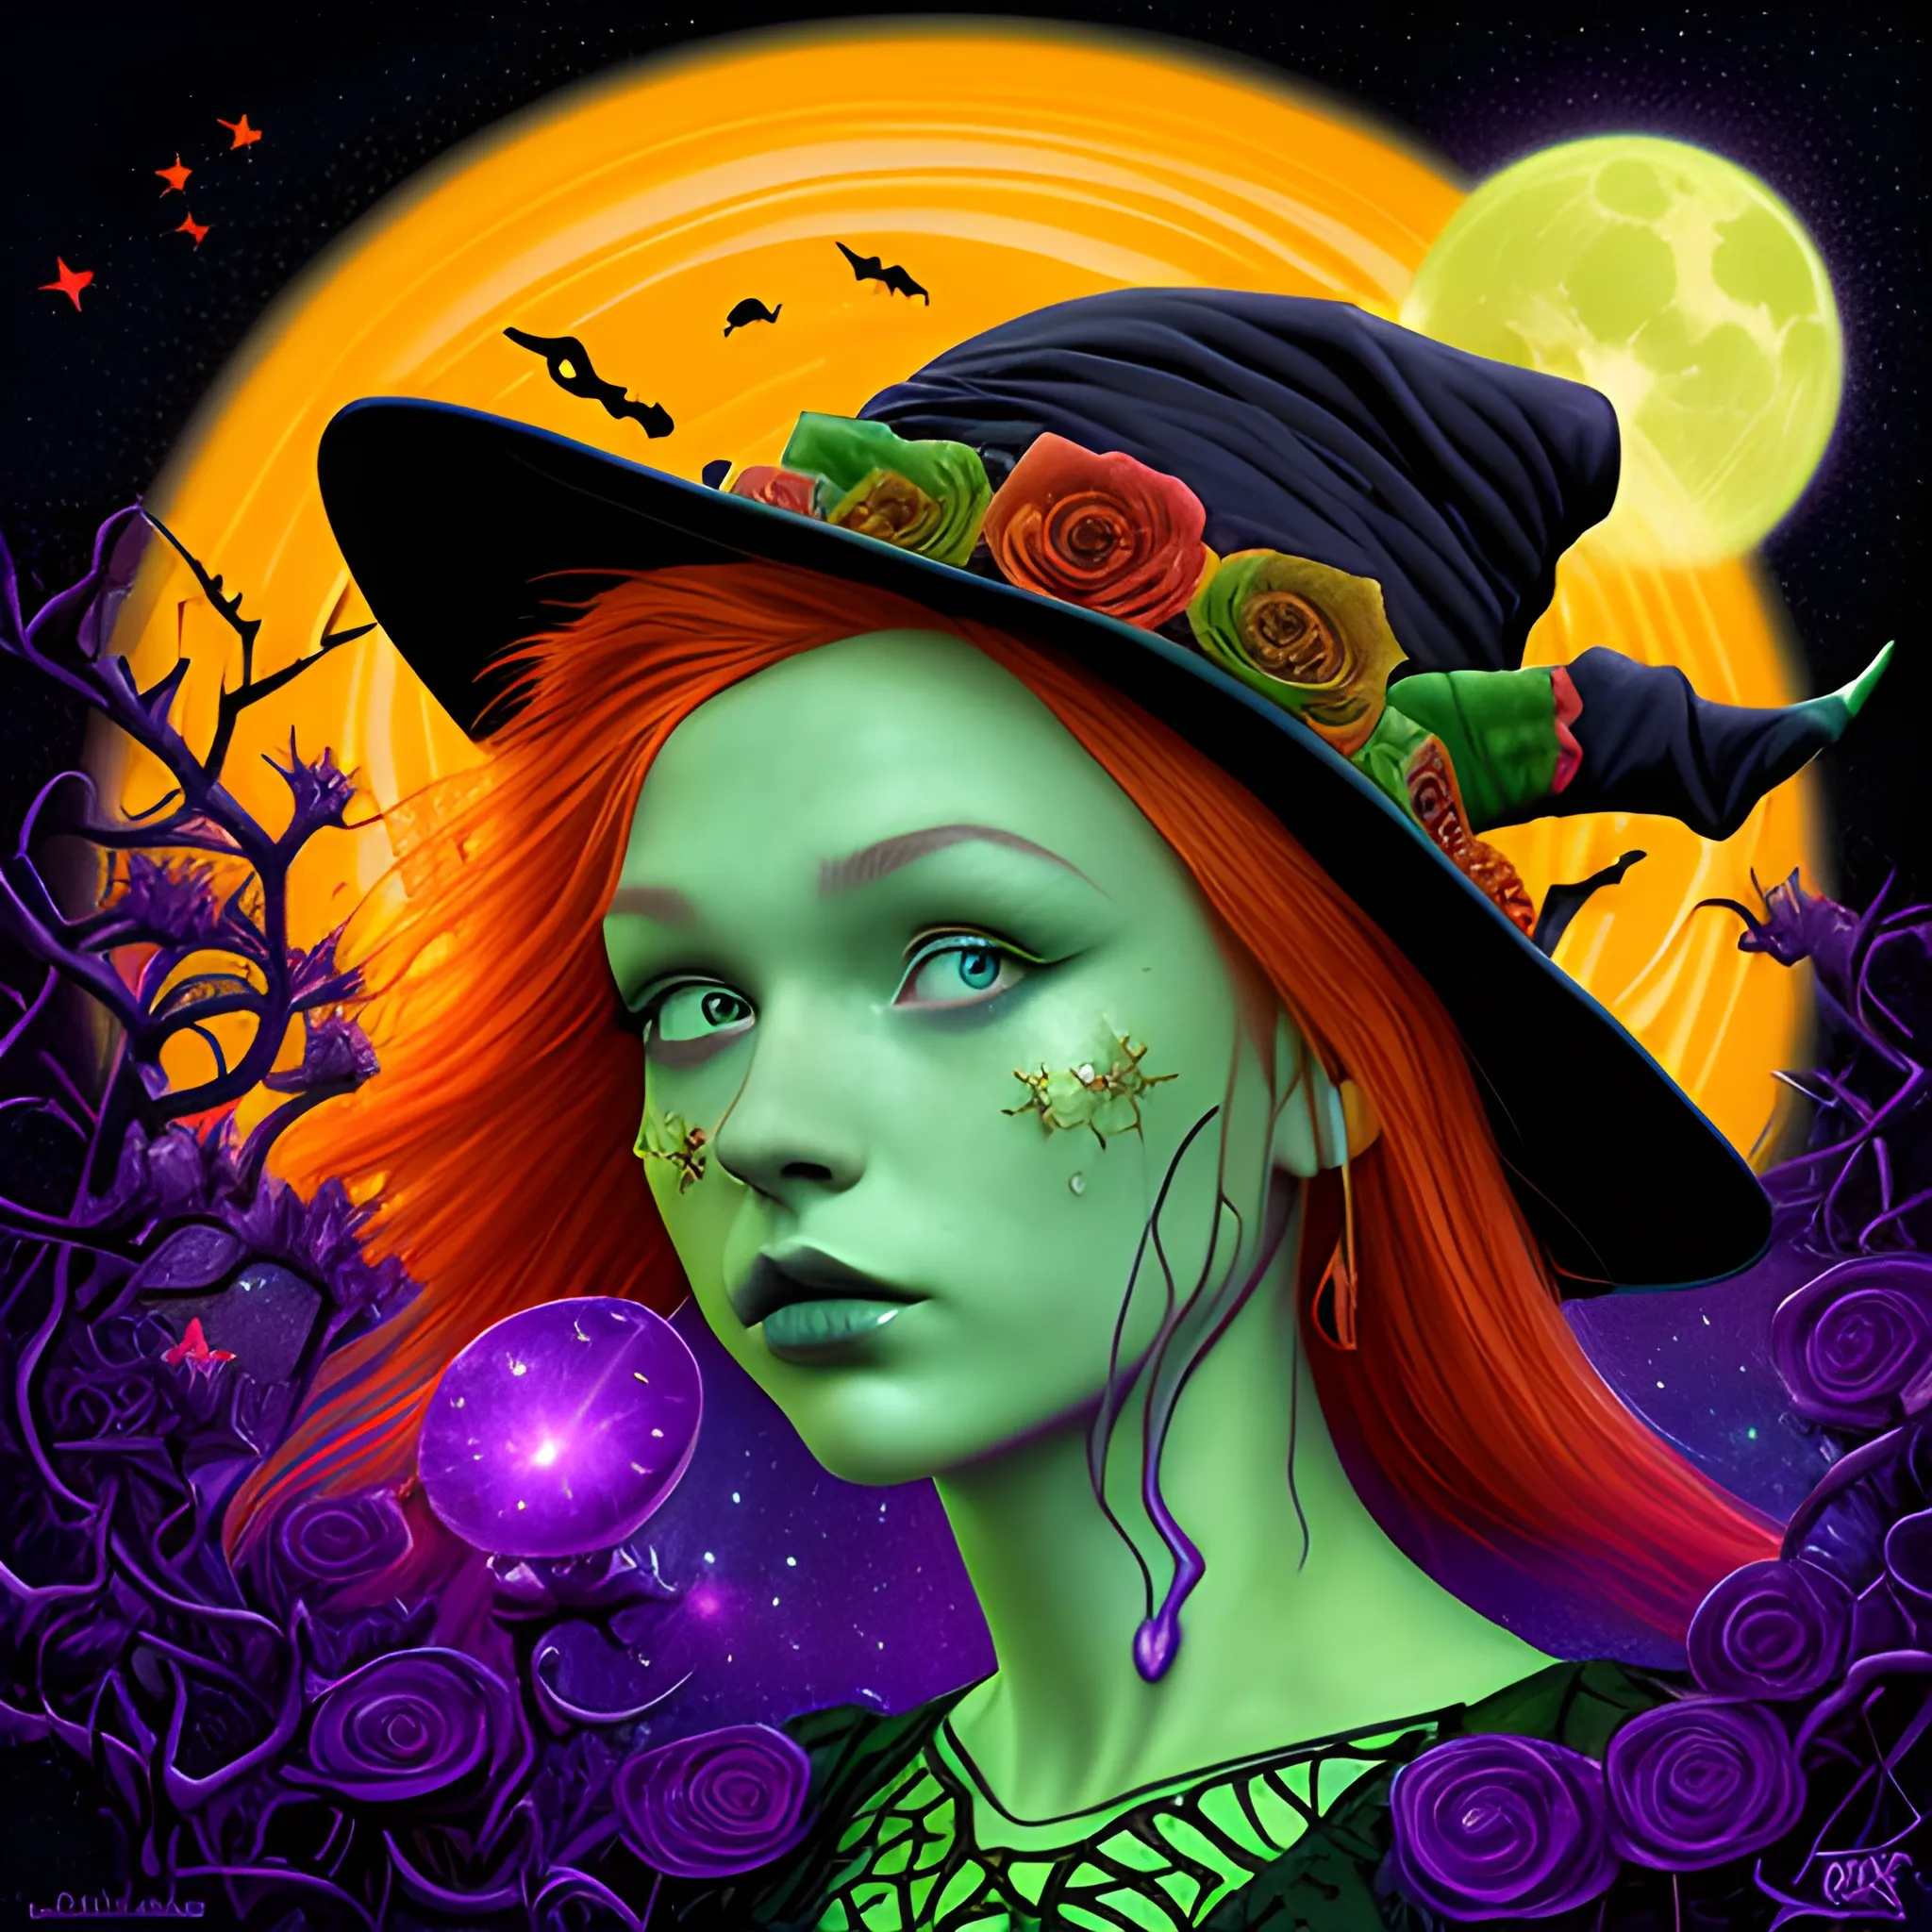 Bella Thorne / Sadie Sink face morph as a Halloween Witch, wearing a thorny witch hat adorned with thorns and black roses; Halloween, bats, full moon in a nebula sky, neon spray paint, acrylic paint, fantastical surrealist world, in the style of Stephen Gammell, extremely detailed, sick, gothic, eldritch, candles, neon grape purple, dayglo orange, chartreuse green, Halloween perfect purple pumpkins, green skulls, orange bats, magic, candles, cobweb, spider, glitter, luminous color sparkles, dayglo orange, neon grape purple, chartreuse green, hot pink, stars, sparkles, glitter, lanterns, gourds, Halloween; Goddess of the Night with a crescent moon and many stars in the style of Maxfield Parrish, starry night, James R. Eads, 3D